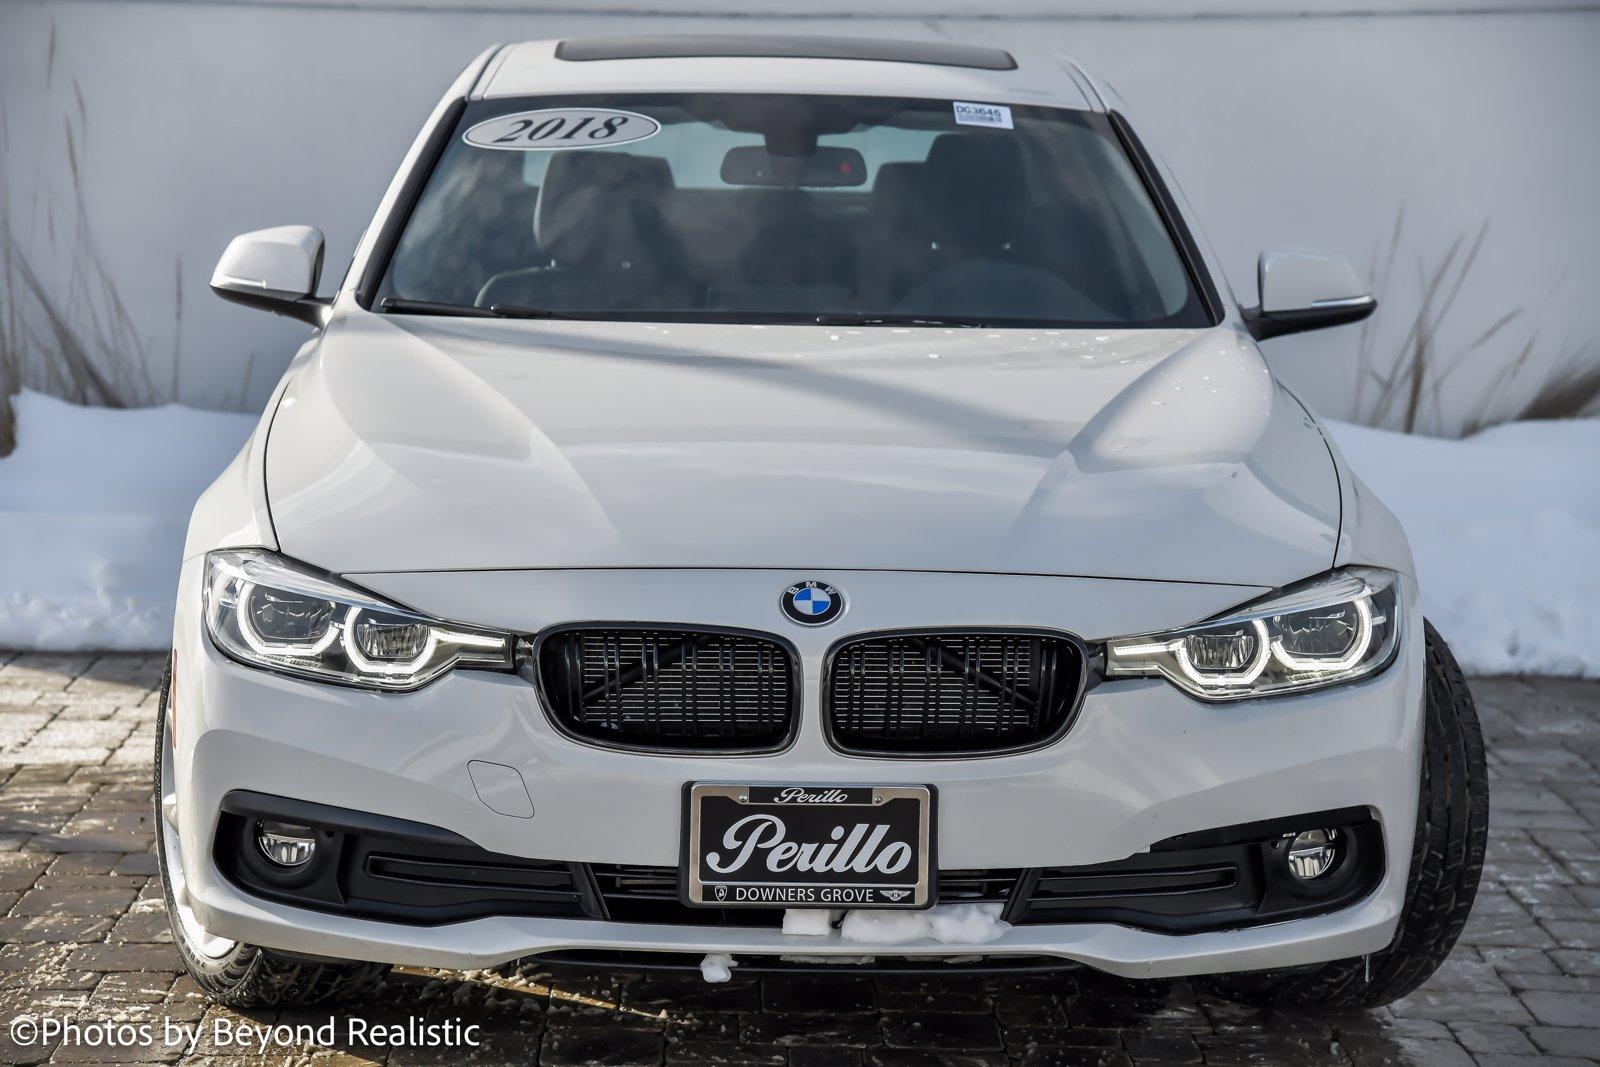 Used 2018 BMW 3 Series 320i xDrive With Navigation | Downers Grove, IL